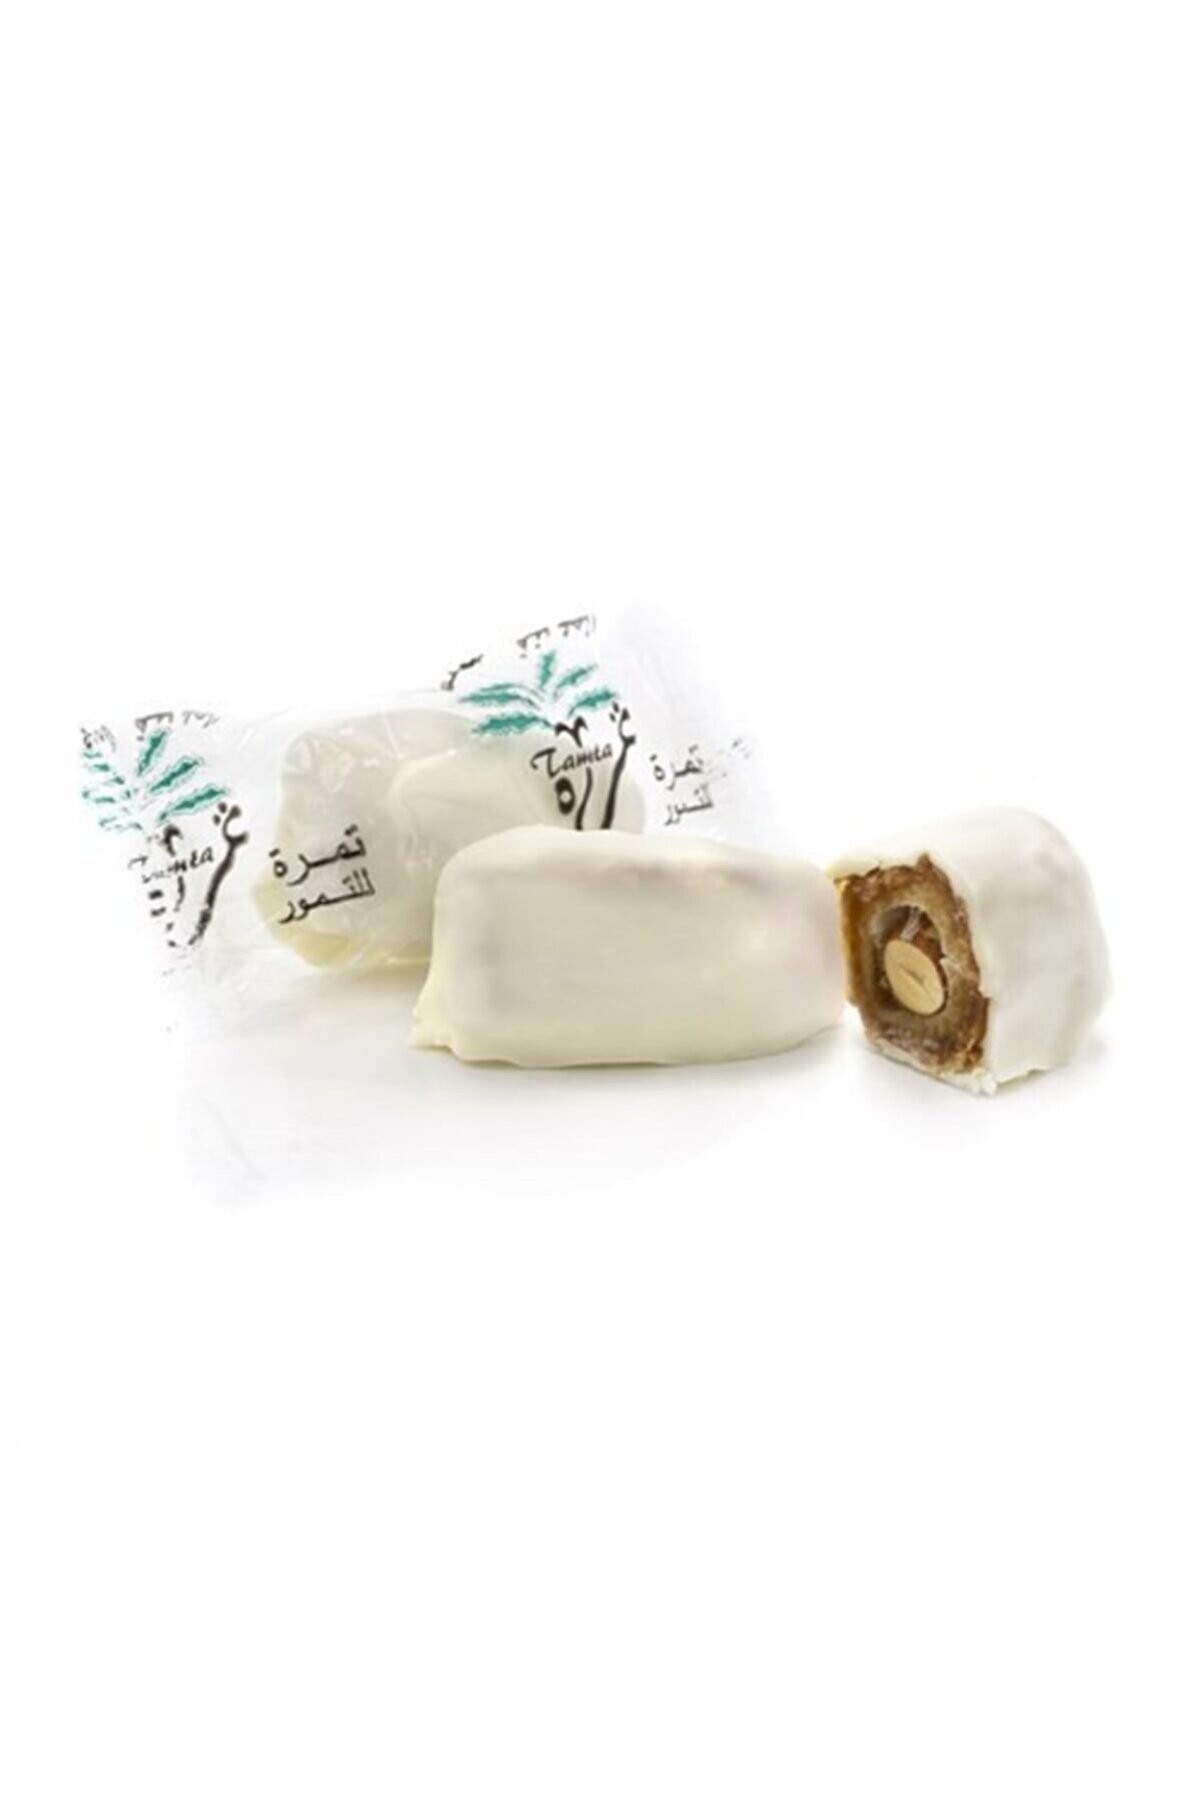 WHITE CHOCOLATE-COVERED ALMOND DATE 1KG